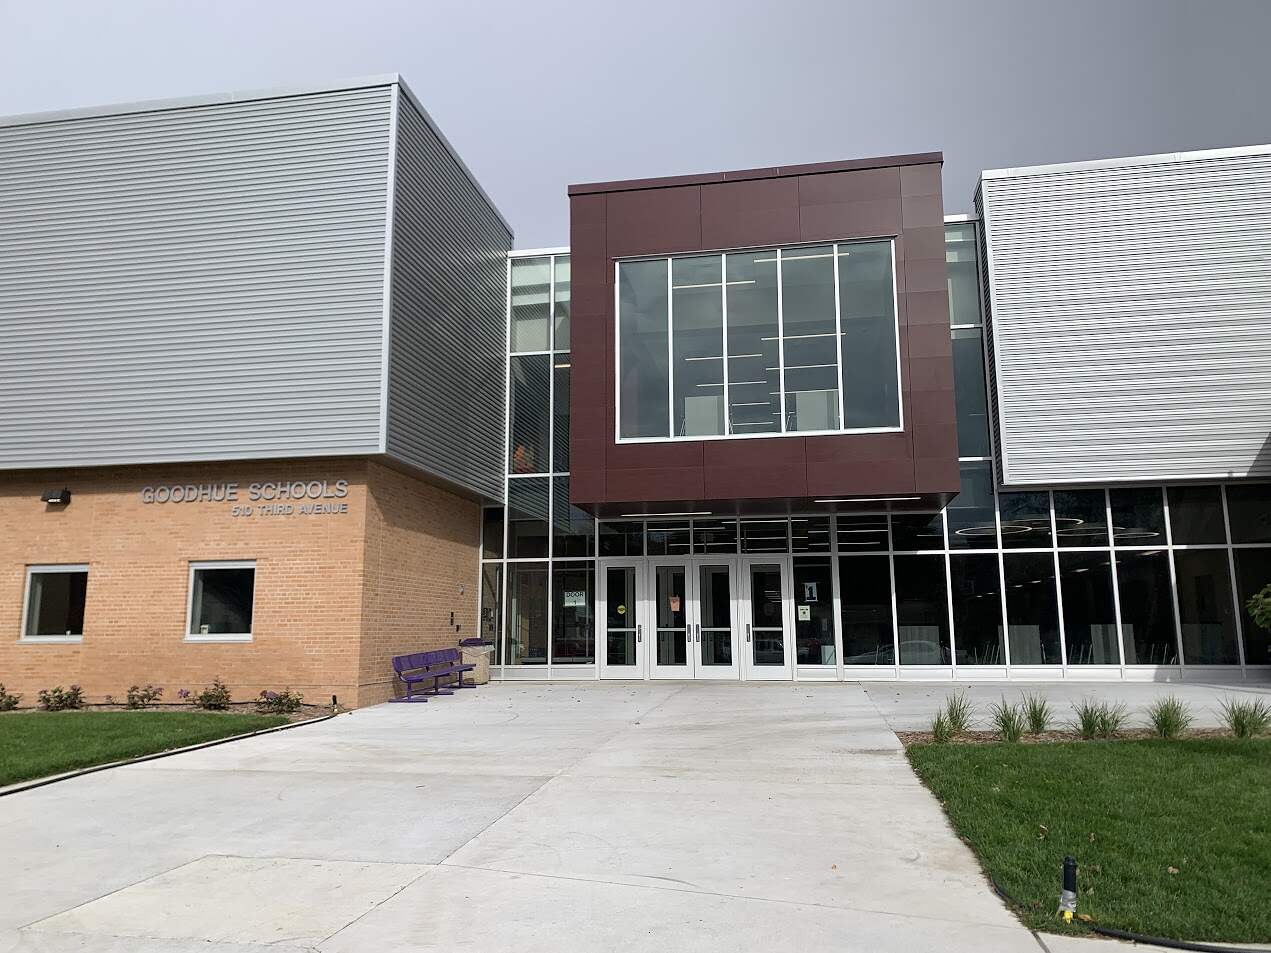 Modern Goodhue School building facade with a glass entrance and metallic exterior under overcast skies.